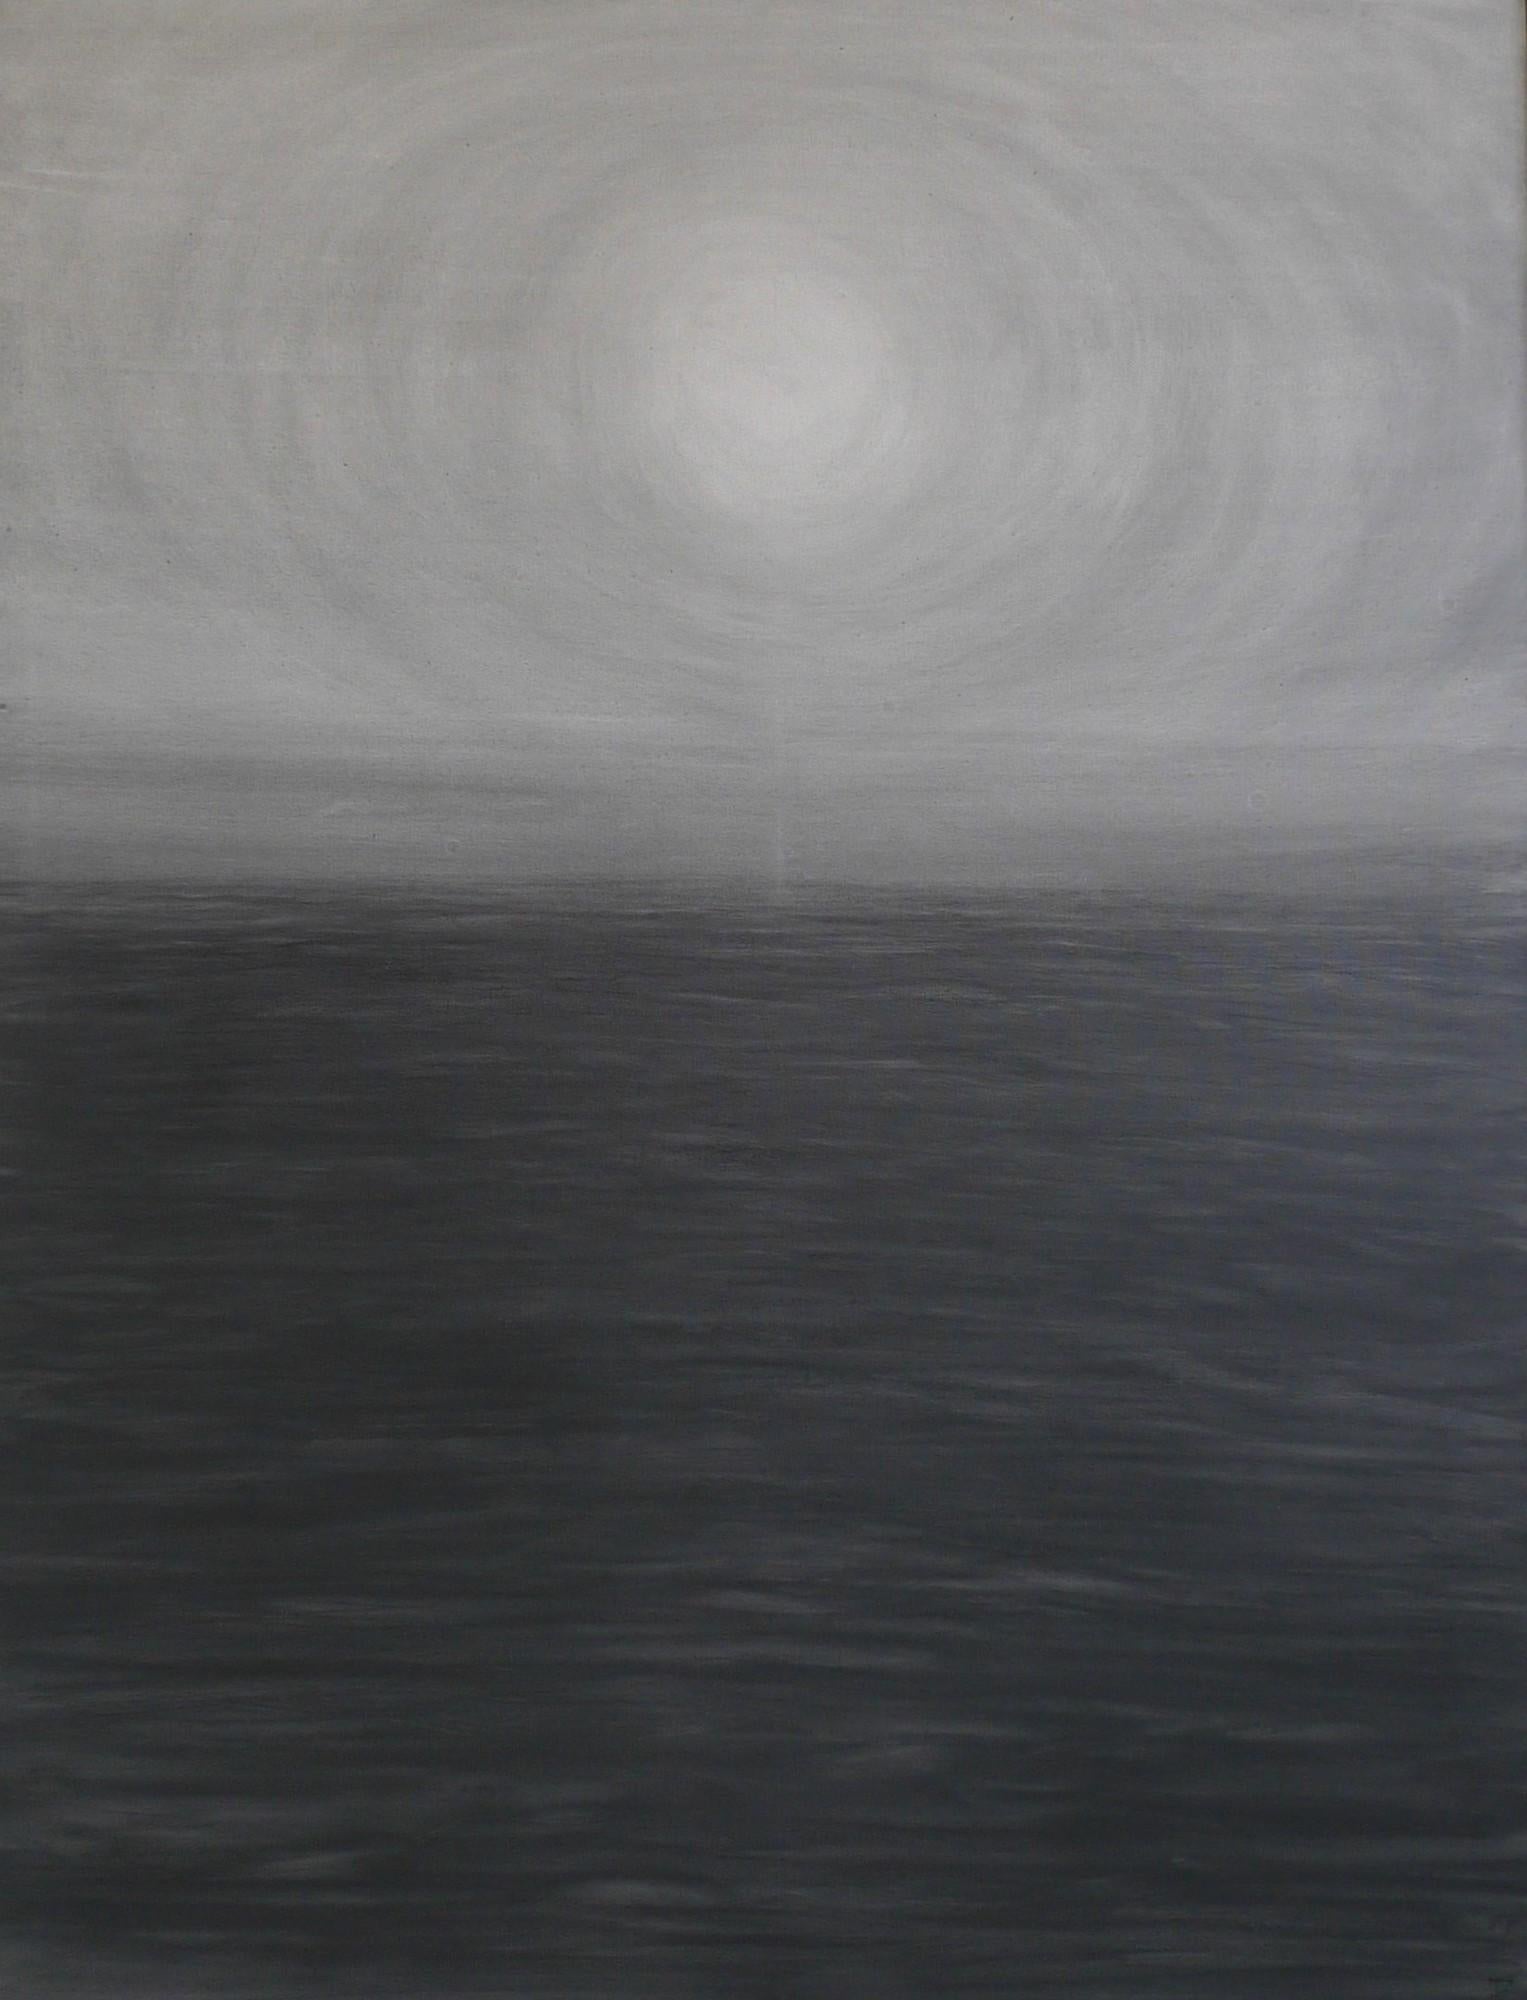 Astre is a unique graphite drawing on linen canvas by contemporary artist Franco Salas Borquez, dimensions are 118 × 91 cm (46.5 × 35.8 in). Dimensions of the framed artwork are 120 x 93 cm (47.2 x 36.6 in)
The artwork is signed, sold framed and